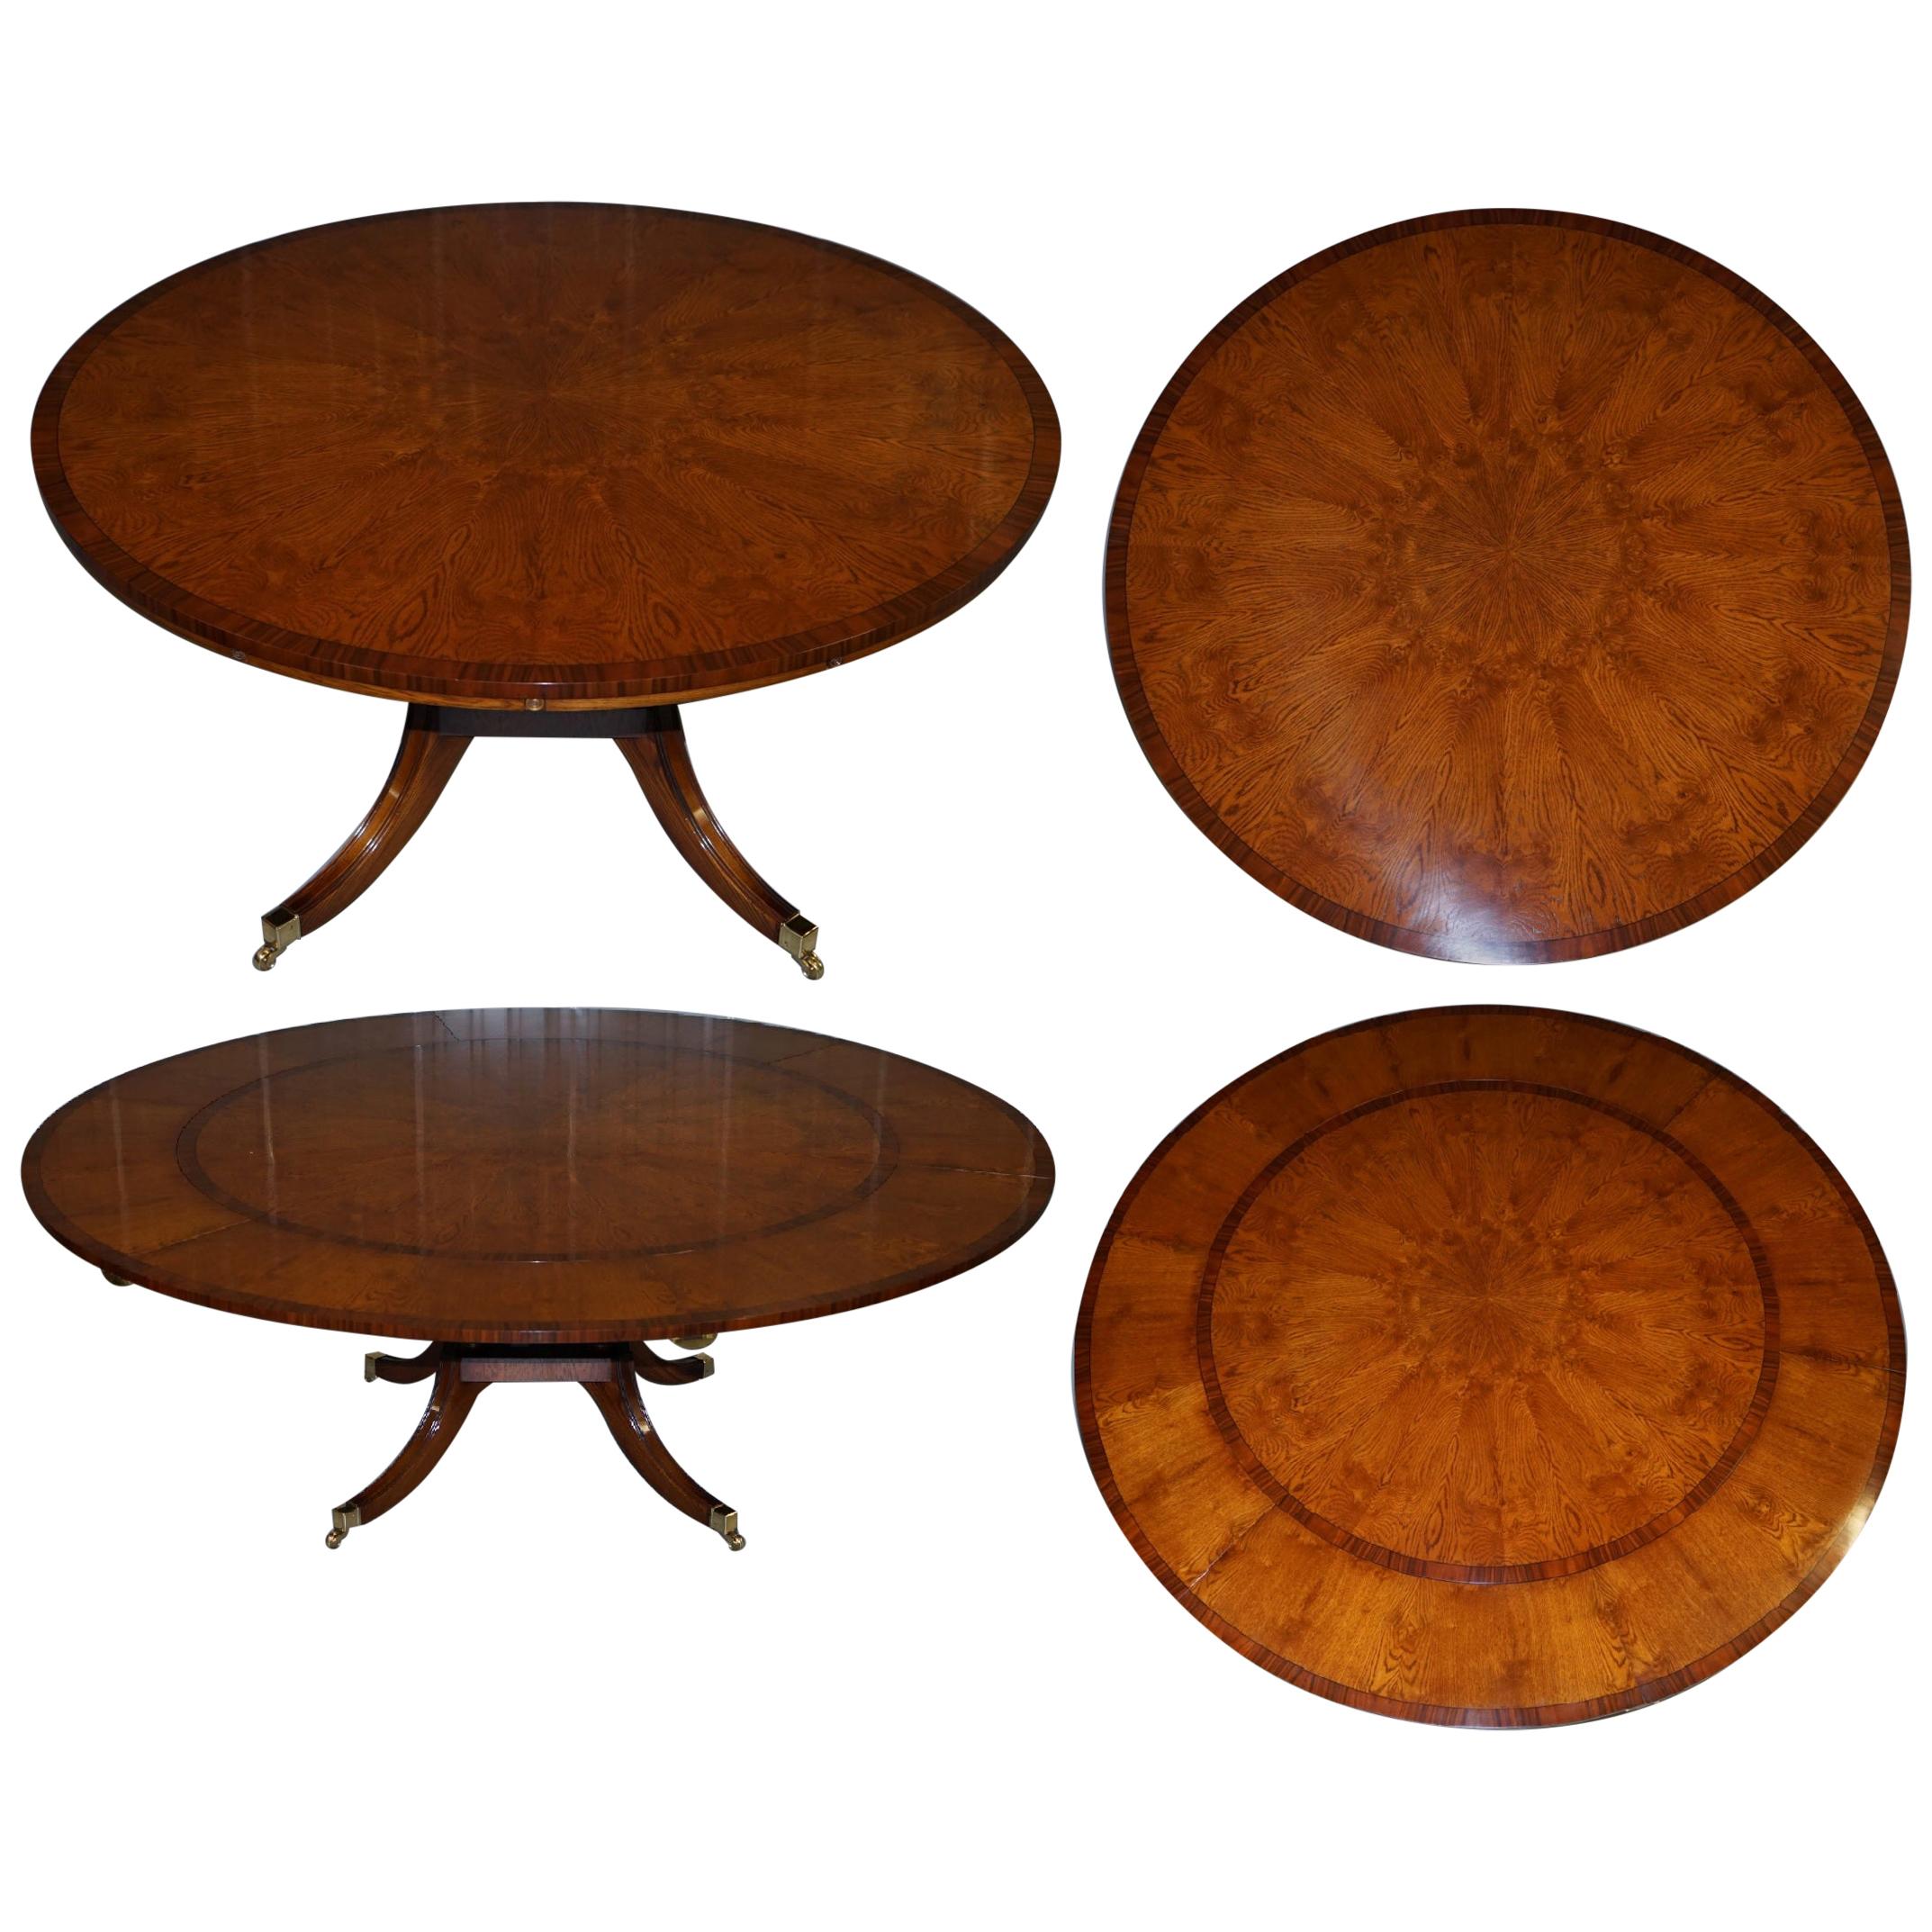 Brand New Cluster Oak Extending Jupe Round Dining Tables Seats 6-12 People For Sale